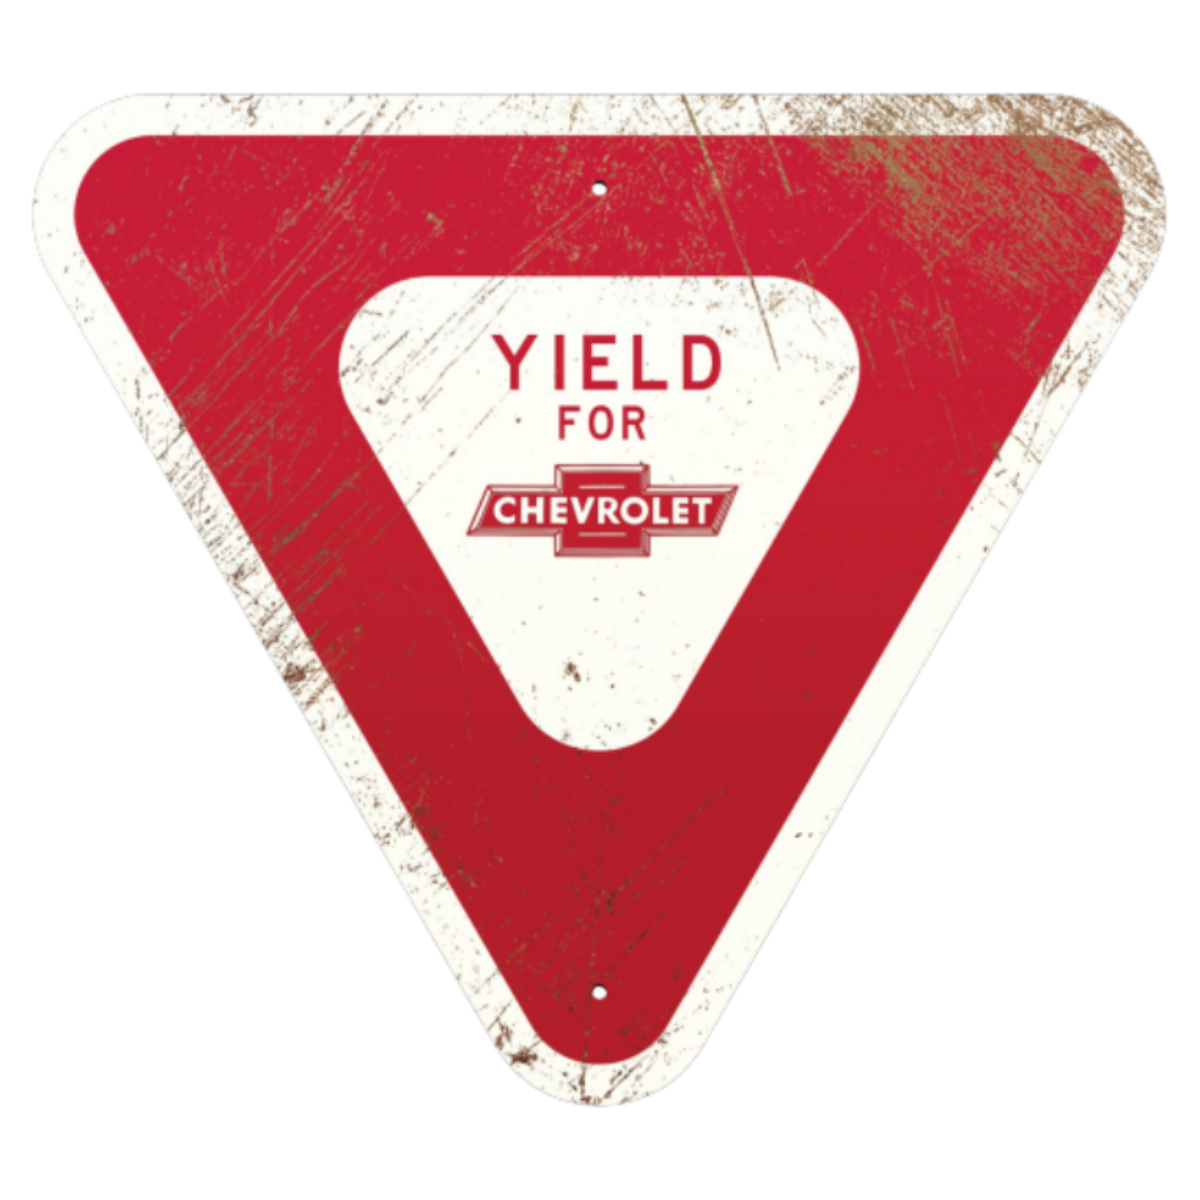 Chevrolet Yield Thick Aluminum Sign